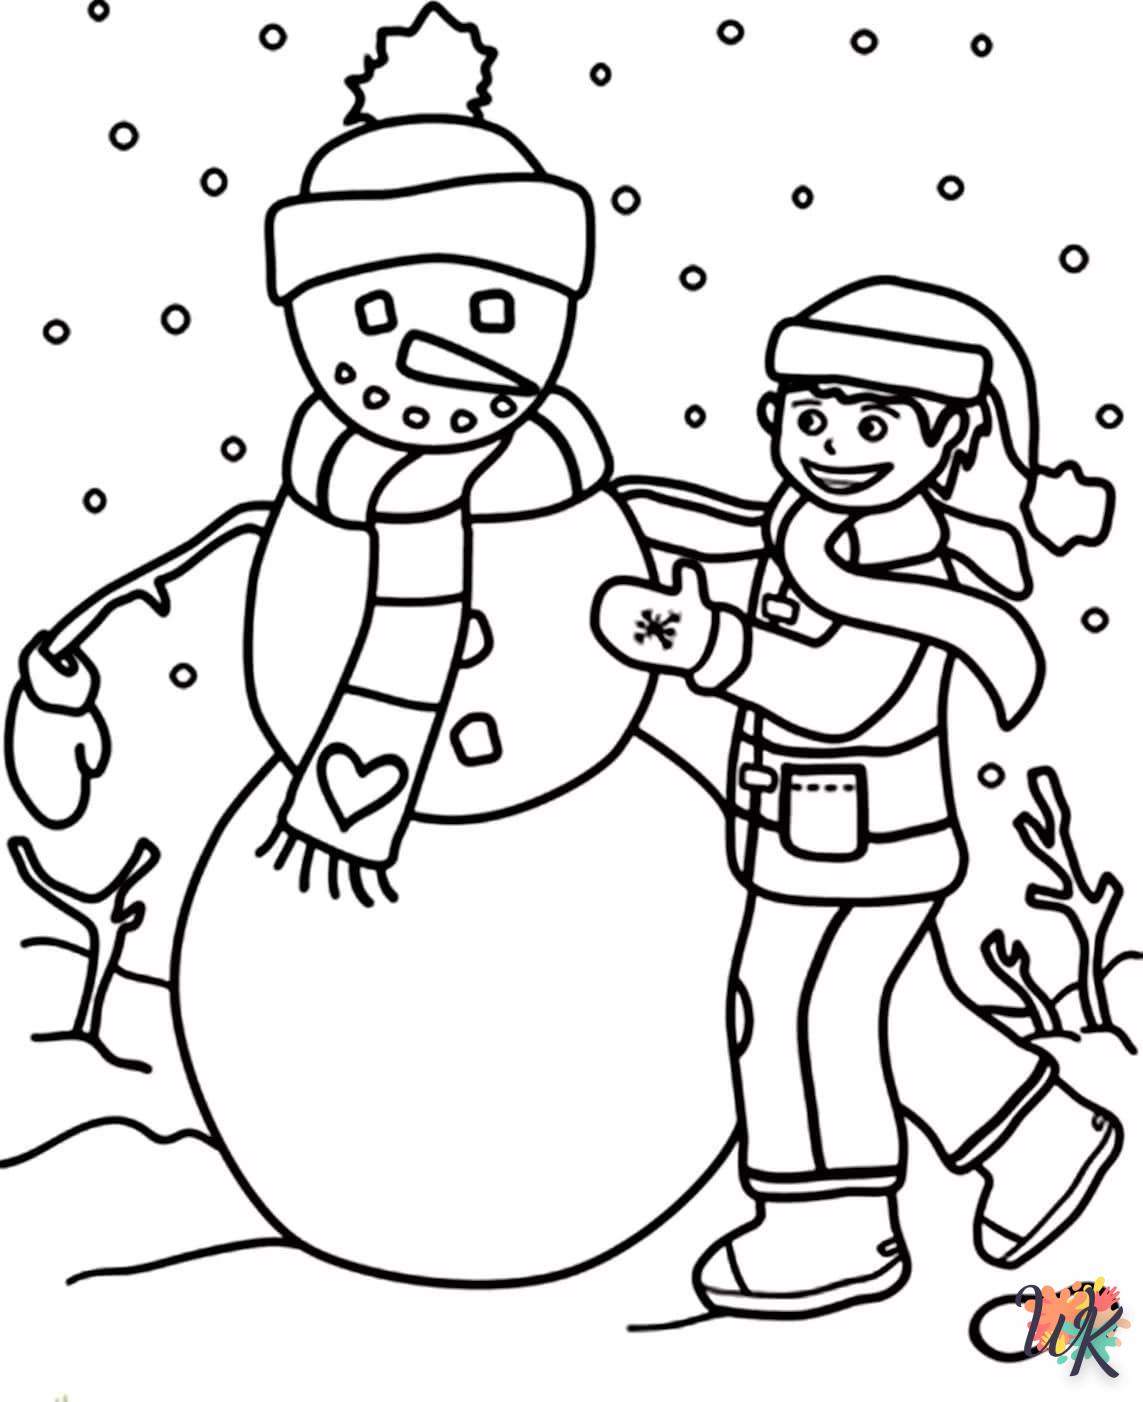 Snowman coloring page to print for 8 year olds